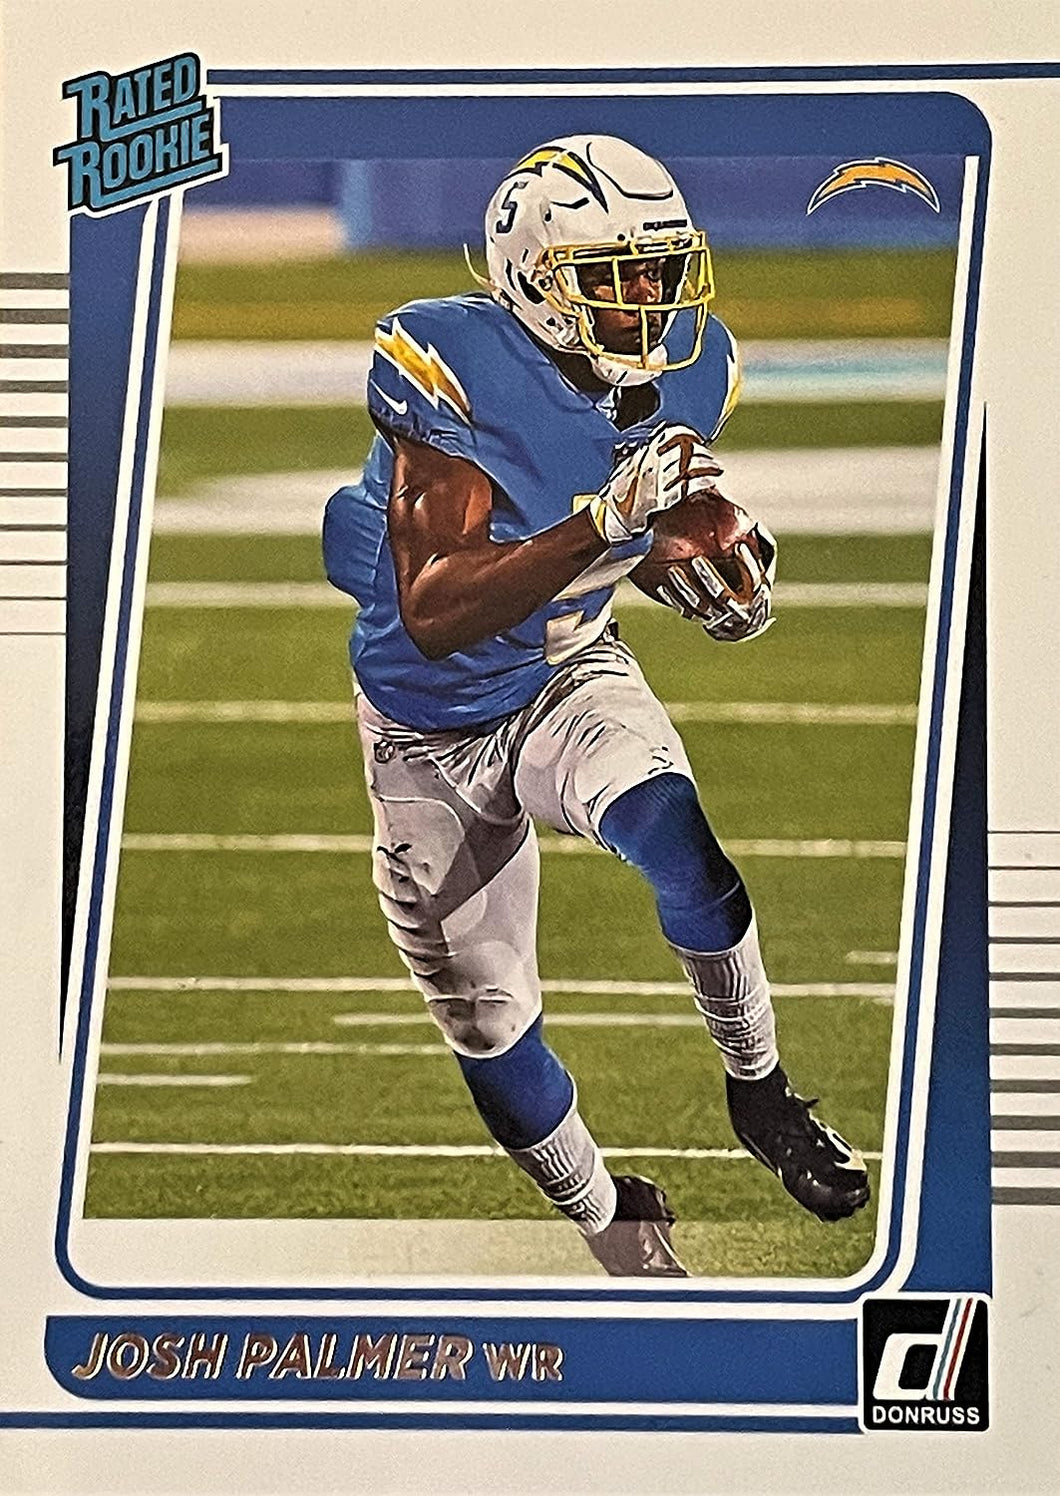 2021 Donruss Football Josh Palmer Rated Rookie 277 Los Angeles Chargers